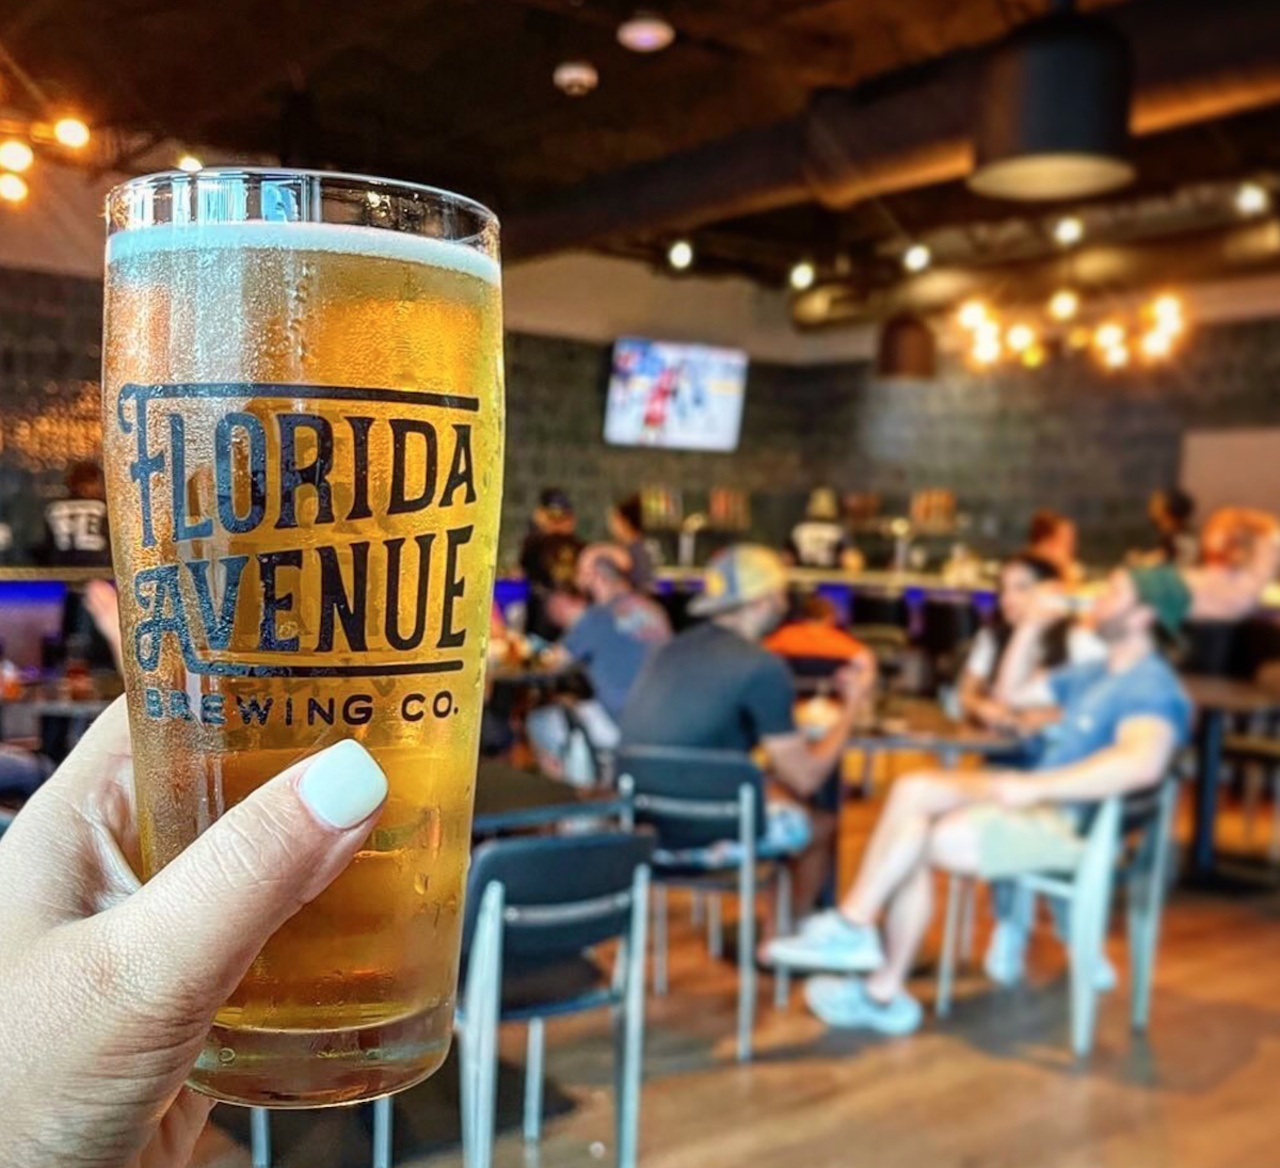 Florida Avenue Brewing Co.
4315 N Florida Ave., Seminole Heights, 813-358-2927
Florida Avenue Brewing Co.’s newest location is owned by the same people who brought you Brew Bus Brewing. The 4,000-square foot space includes a taproom and small-batch brewery, with an on-site kitchen and shaded outdoor patio. The new brewery boasts 16-taps and a full-liquor bar. 
Photo via  Florida Avenue Brewing Co./Instagram